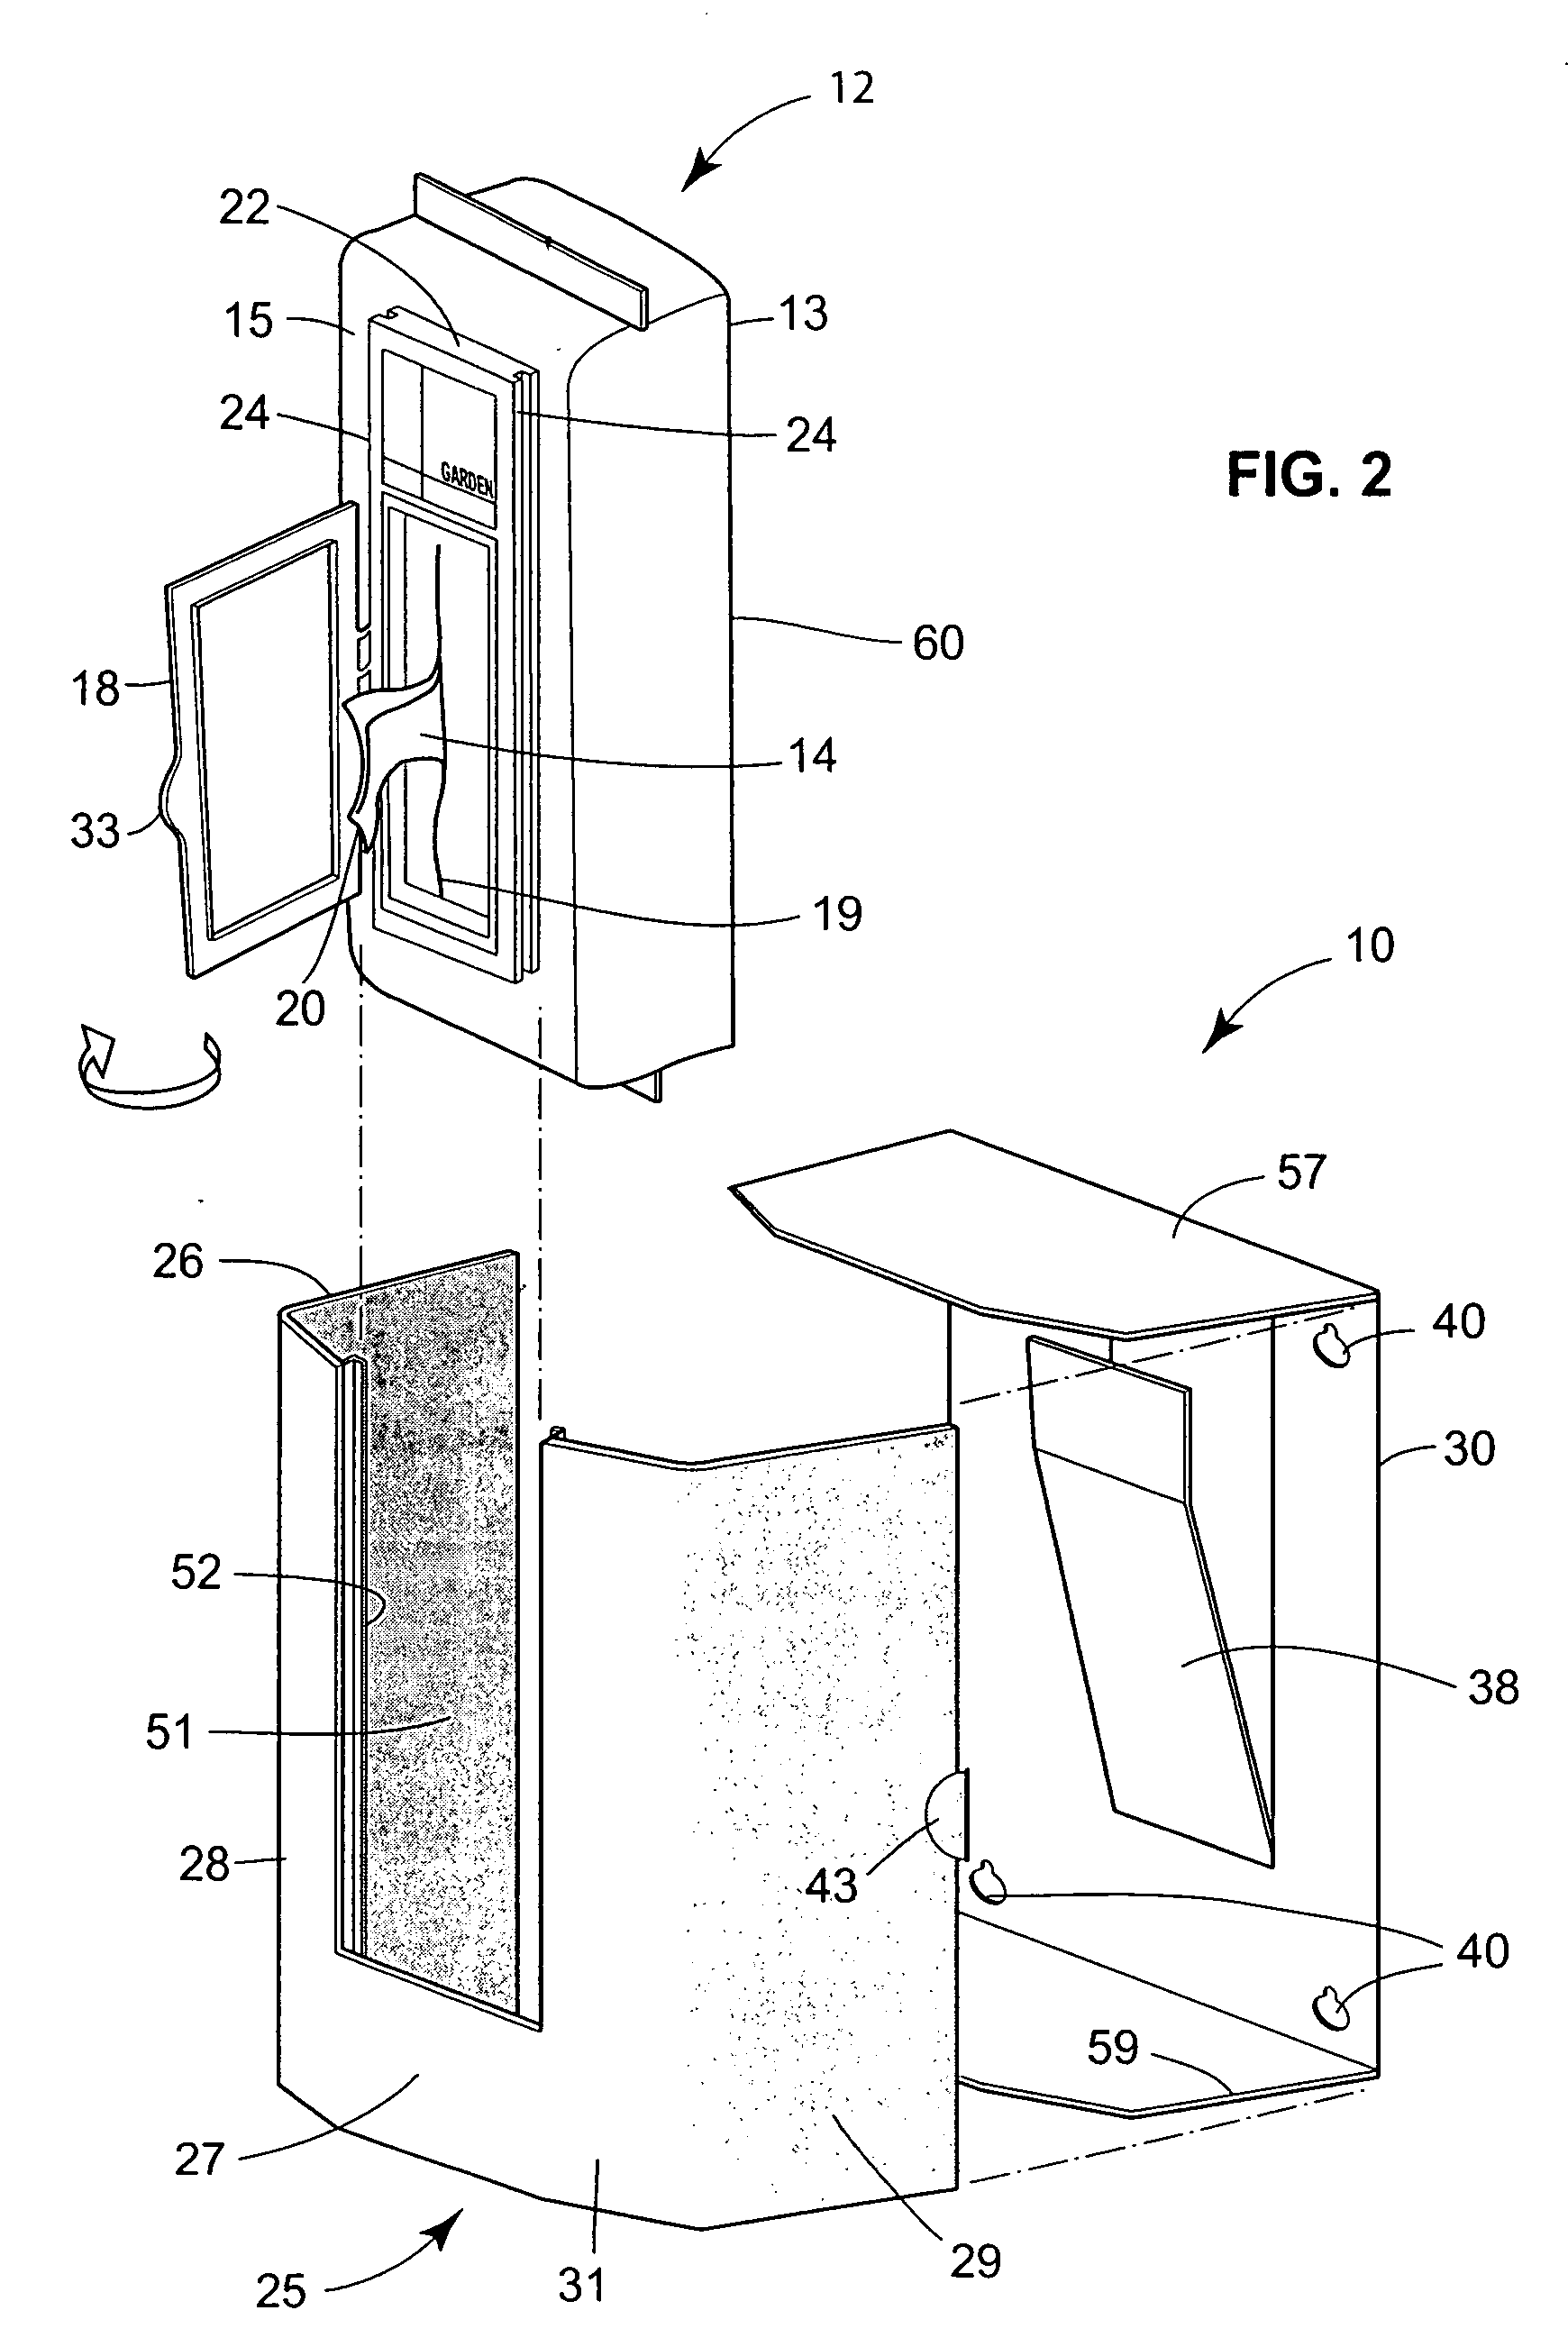 Apparatus, system and method for dispensing wipes